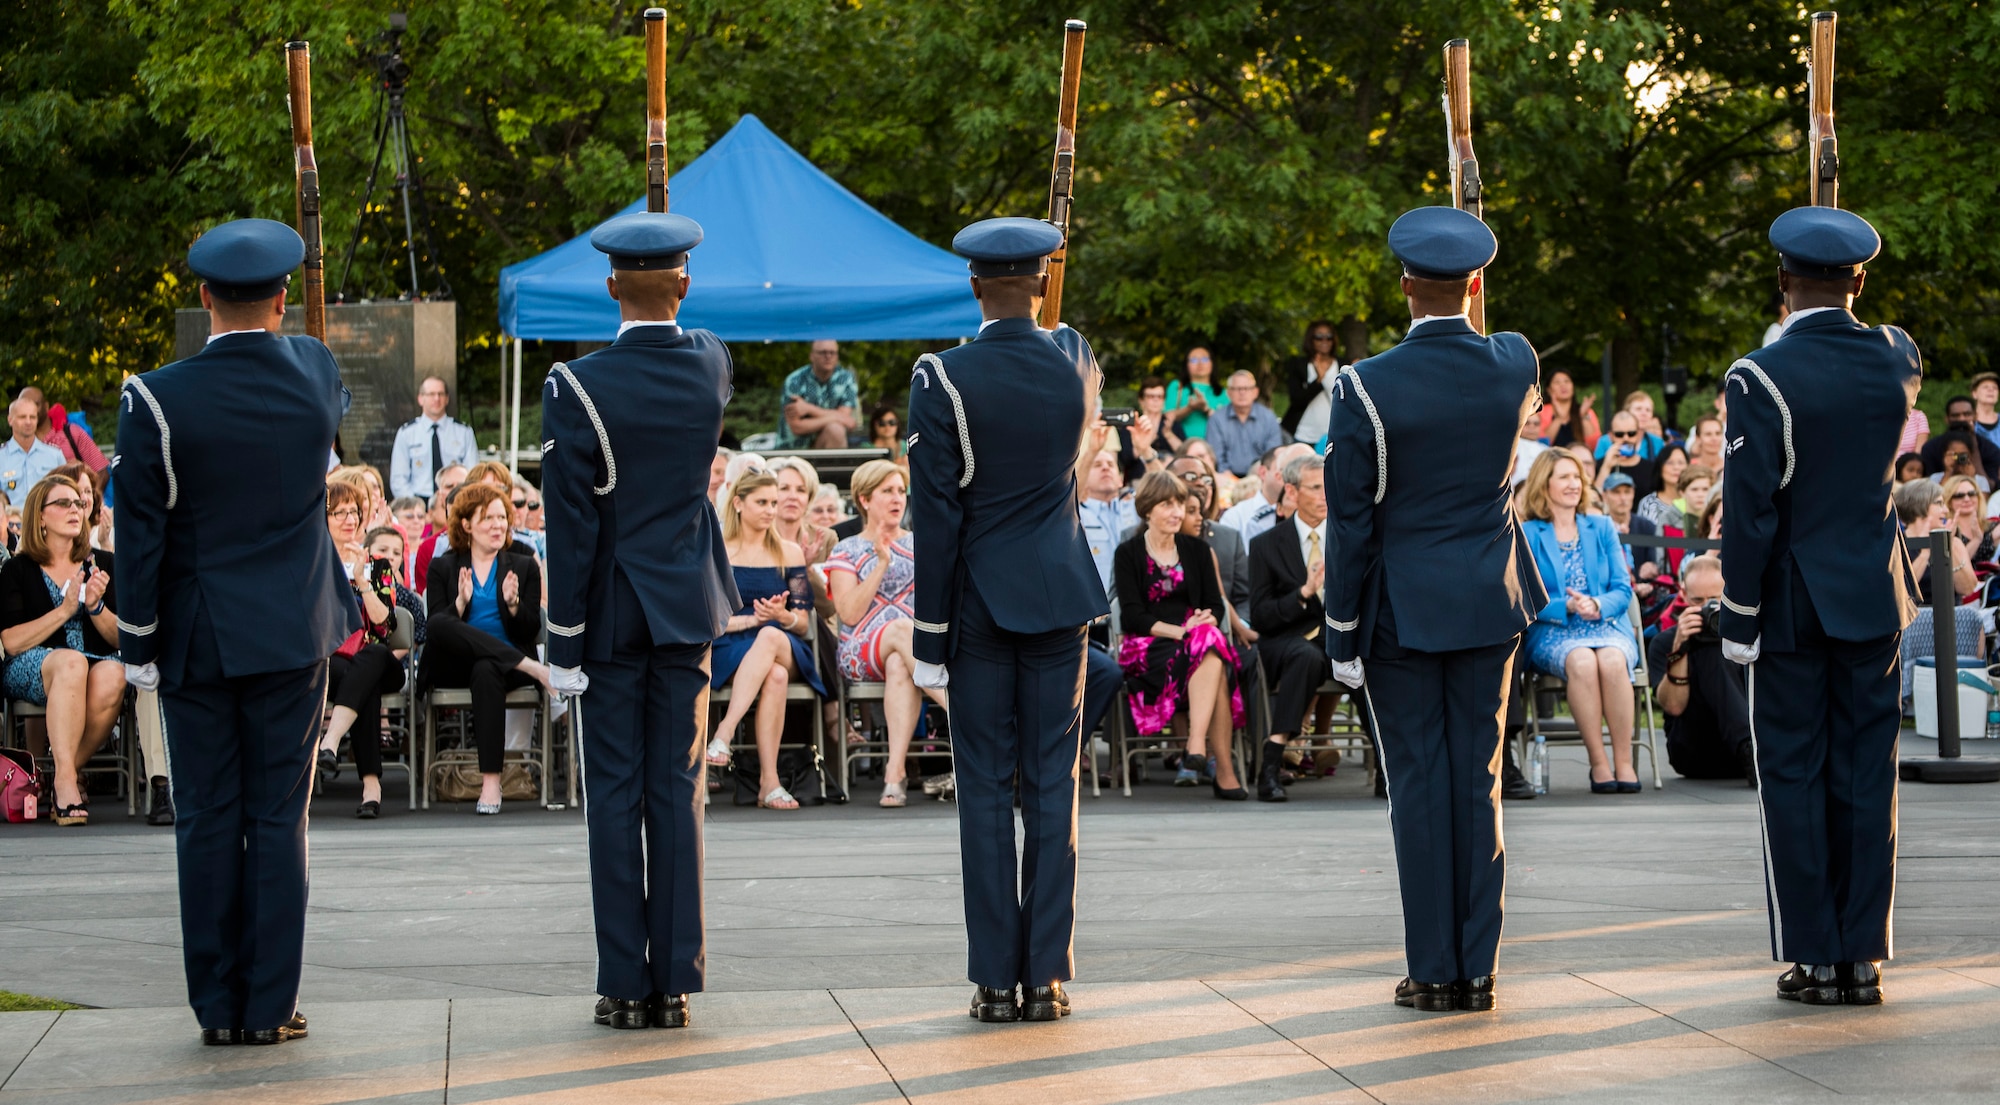 The second installment of the Heritage to Horizons concert series celebrating the Air Force's 70 years of breaking barriers was held at the Air Force Memorial, Arlington Va. June 9, 2017. The event was co-hosted by Undersecretary of the Air Force Lisa Disbrow and the Vice Chief of Staff of the Air Force Gen. Stephen Wilson, and featured performances by the U.S. Air Force Band and the U.S. Air Force honor Guard Drill Team.